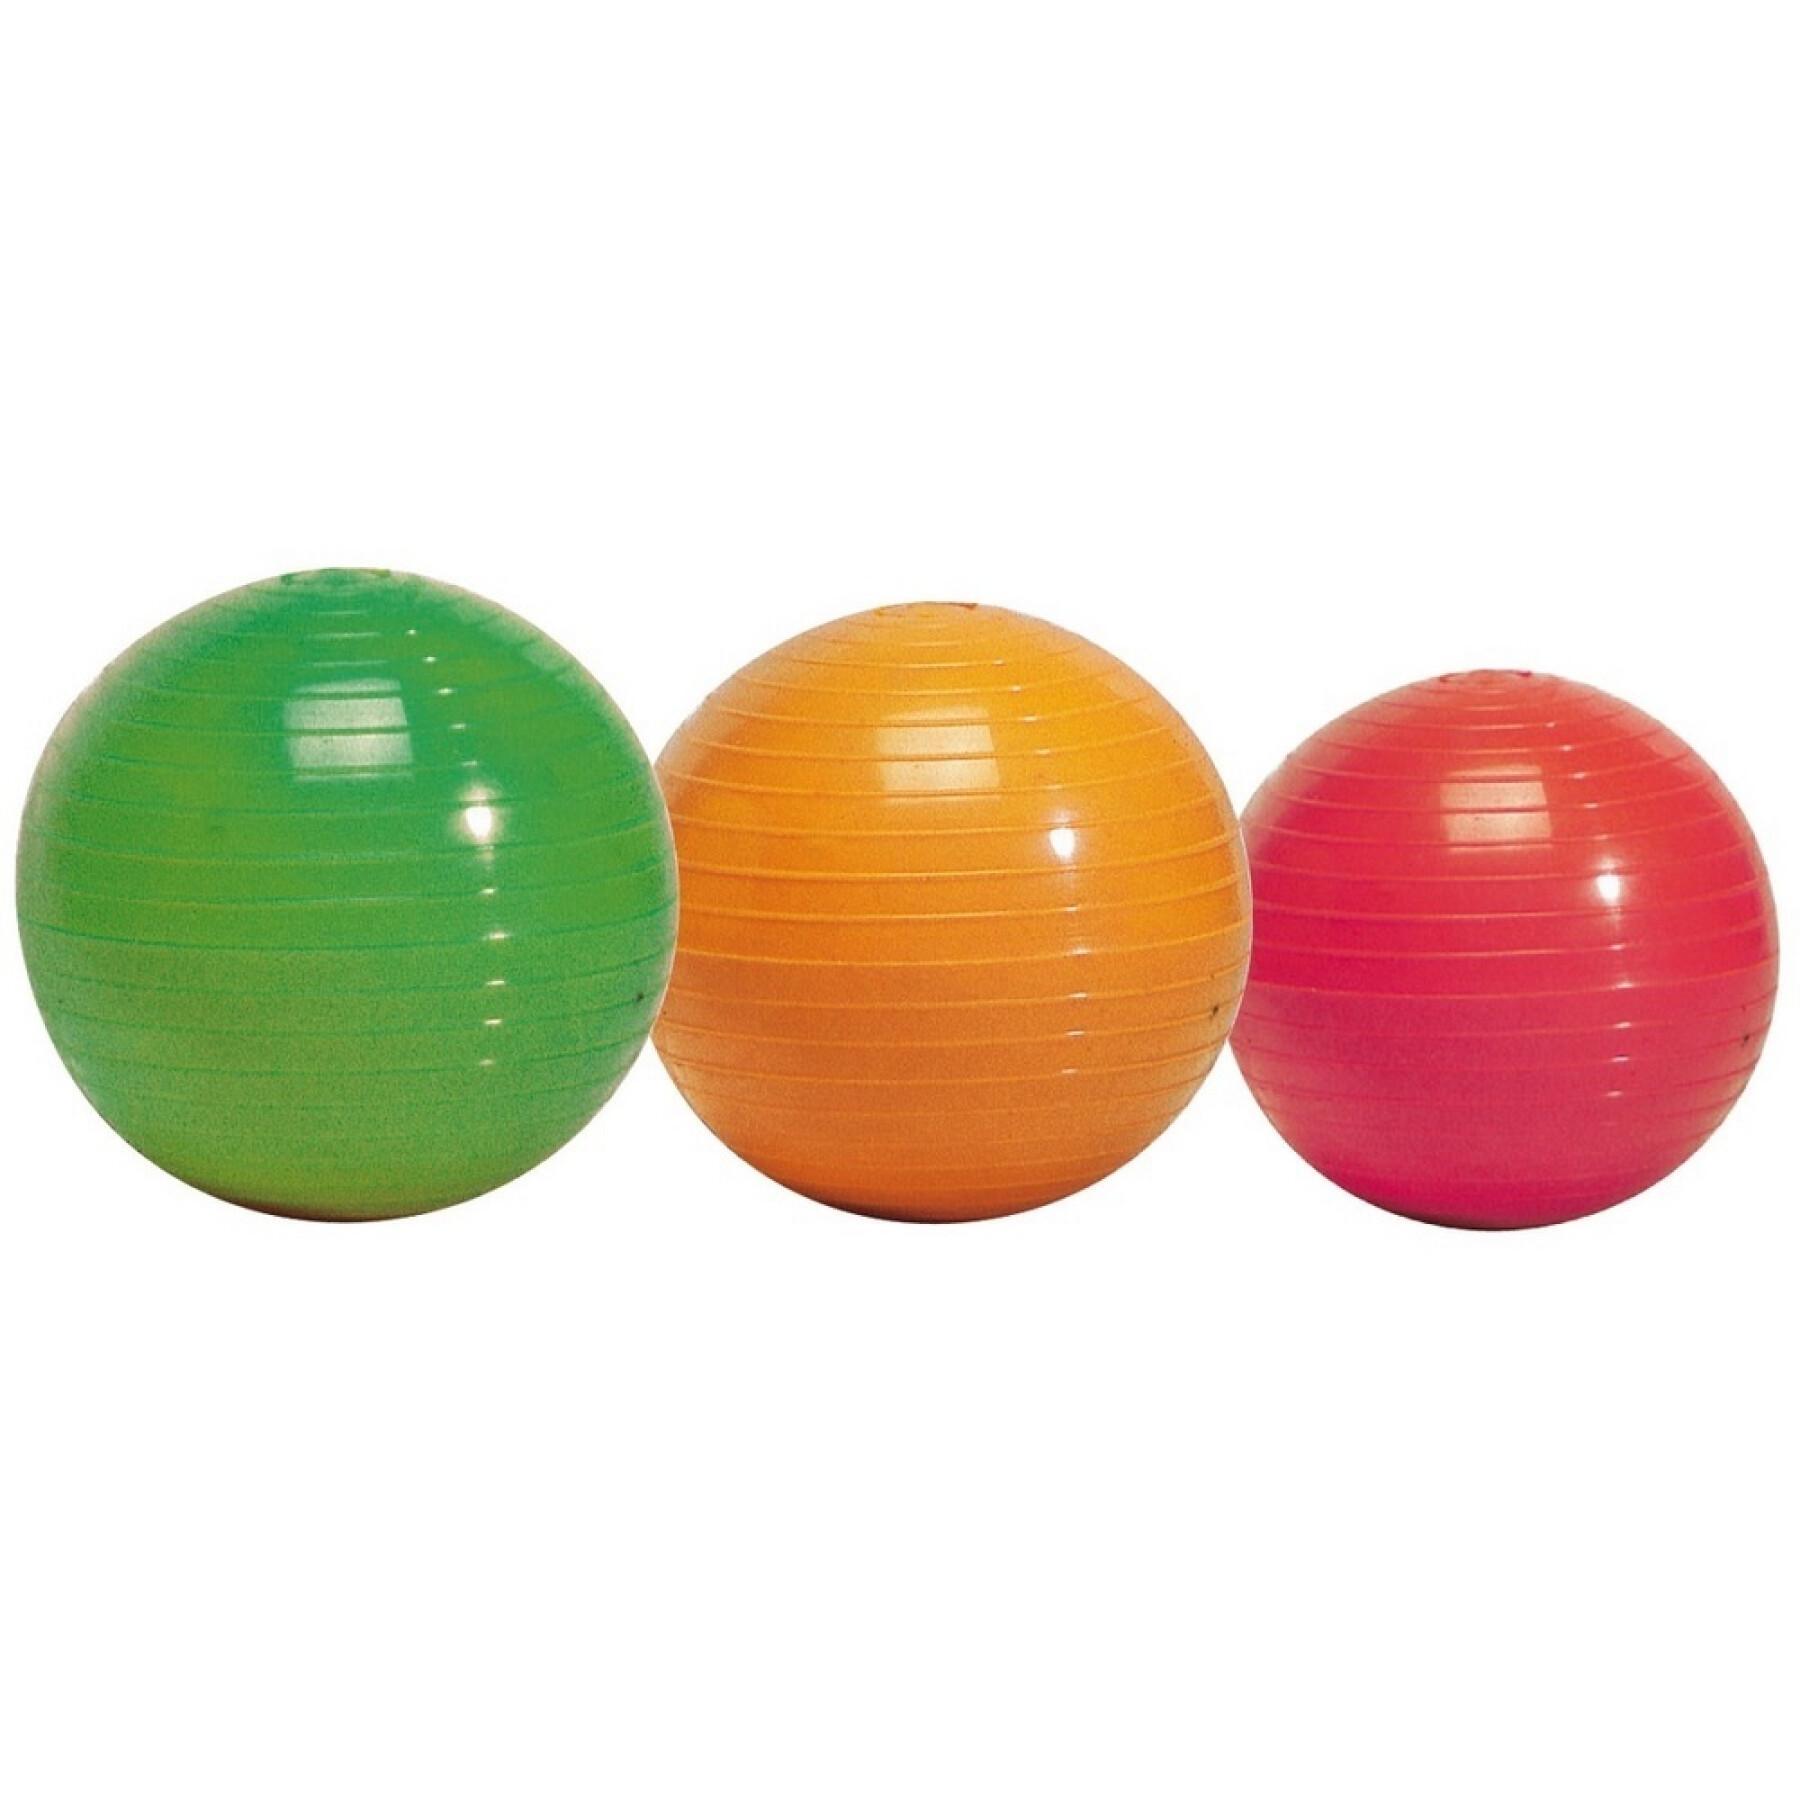 Ballasted ball with Tremblay stripes 200 g